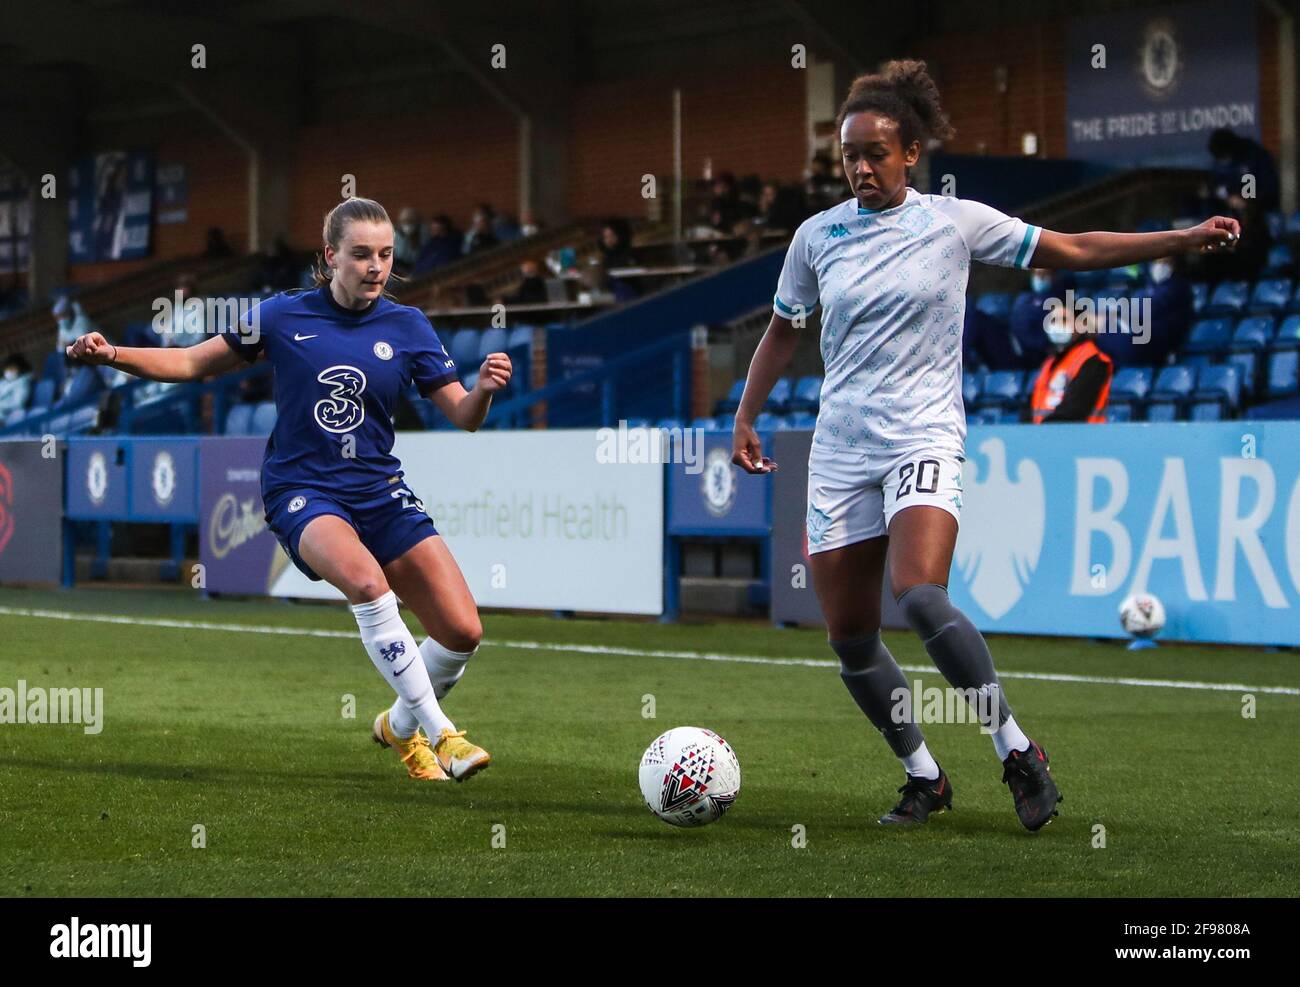 Chelsea's Jorja Fox (left) and London City Lionesses' Atlanta Primus (right) battle for the ball during the Vitality Women's FA Cup fourth round match at Kingsmeadow Stadium, London. Stock Photo